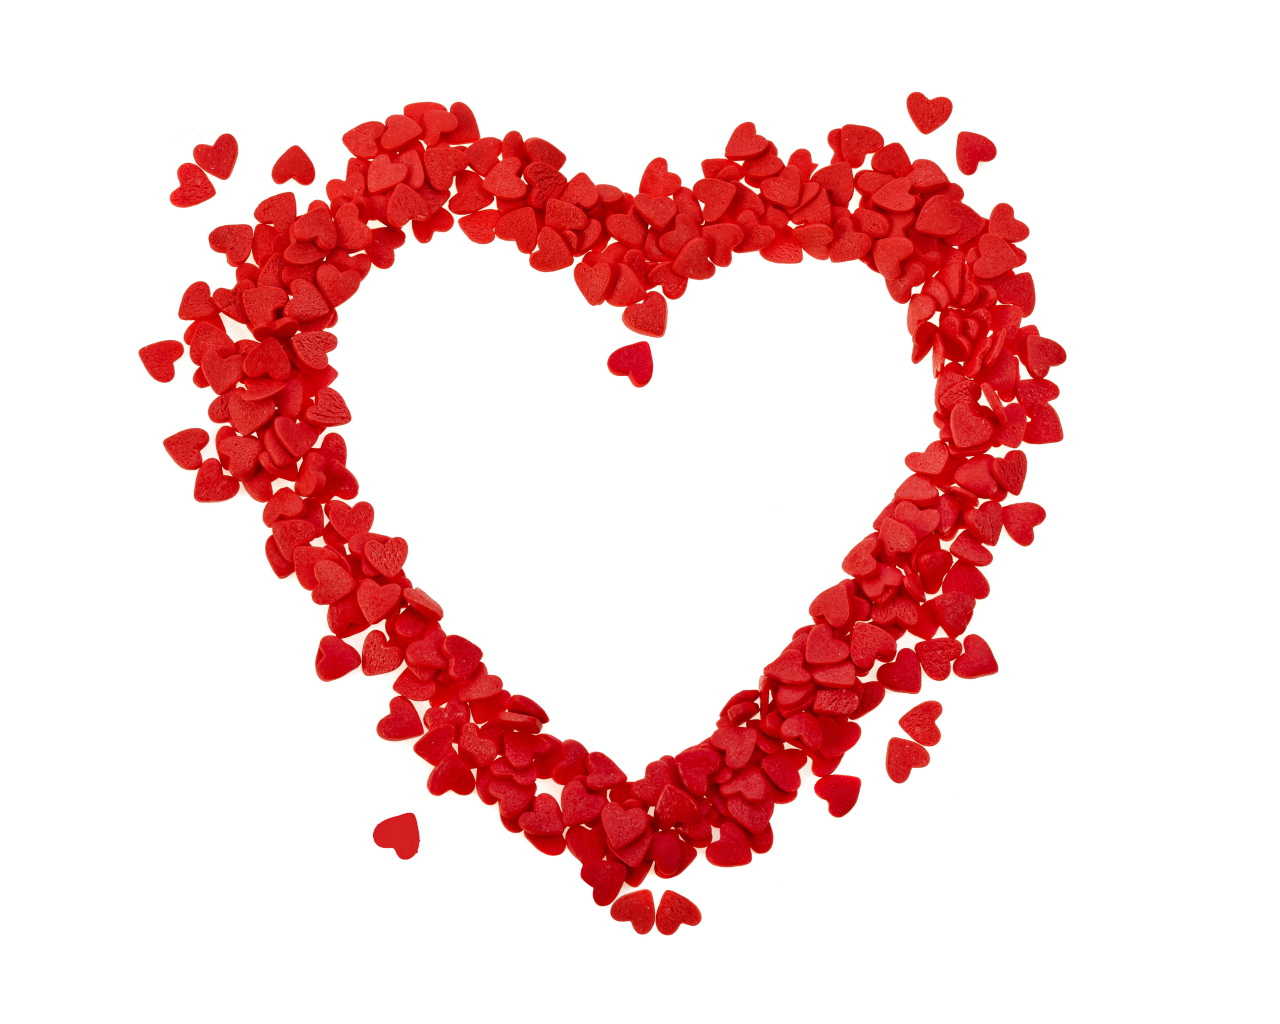 Heart of small red hearts on a white background.